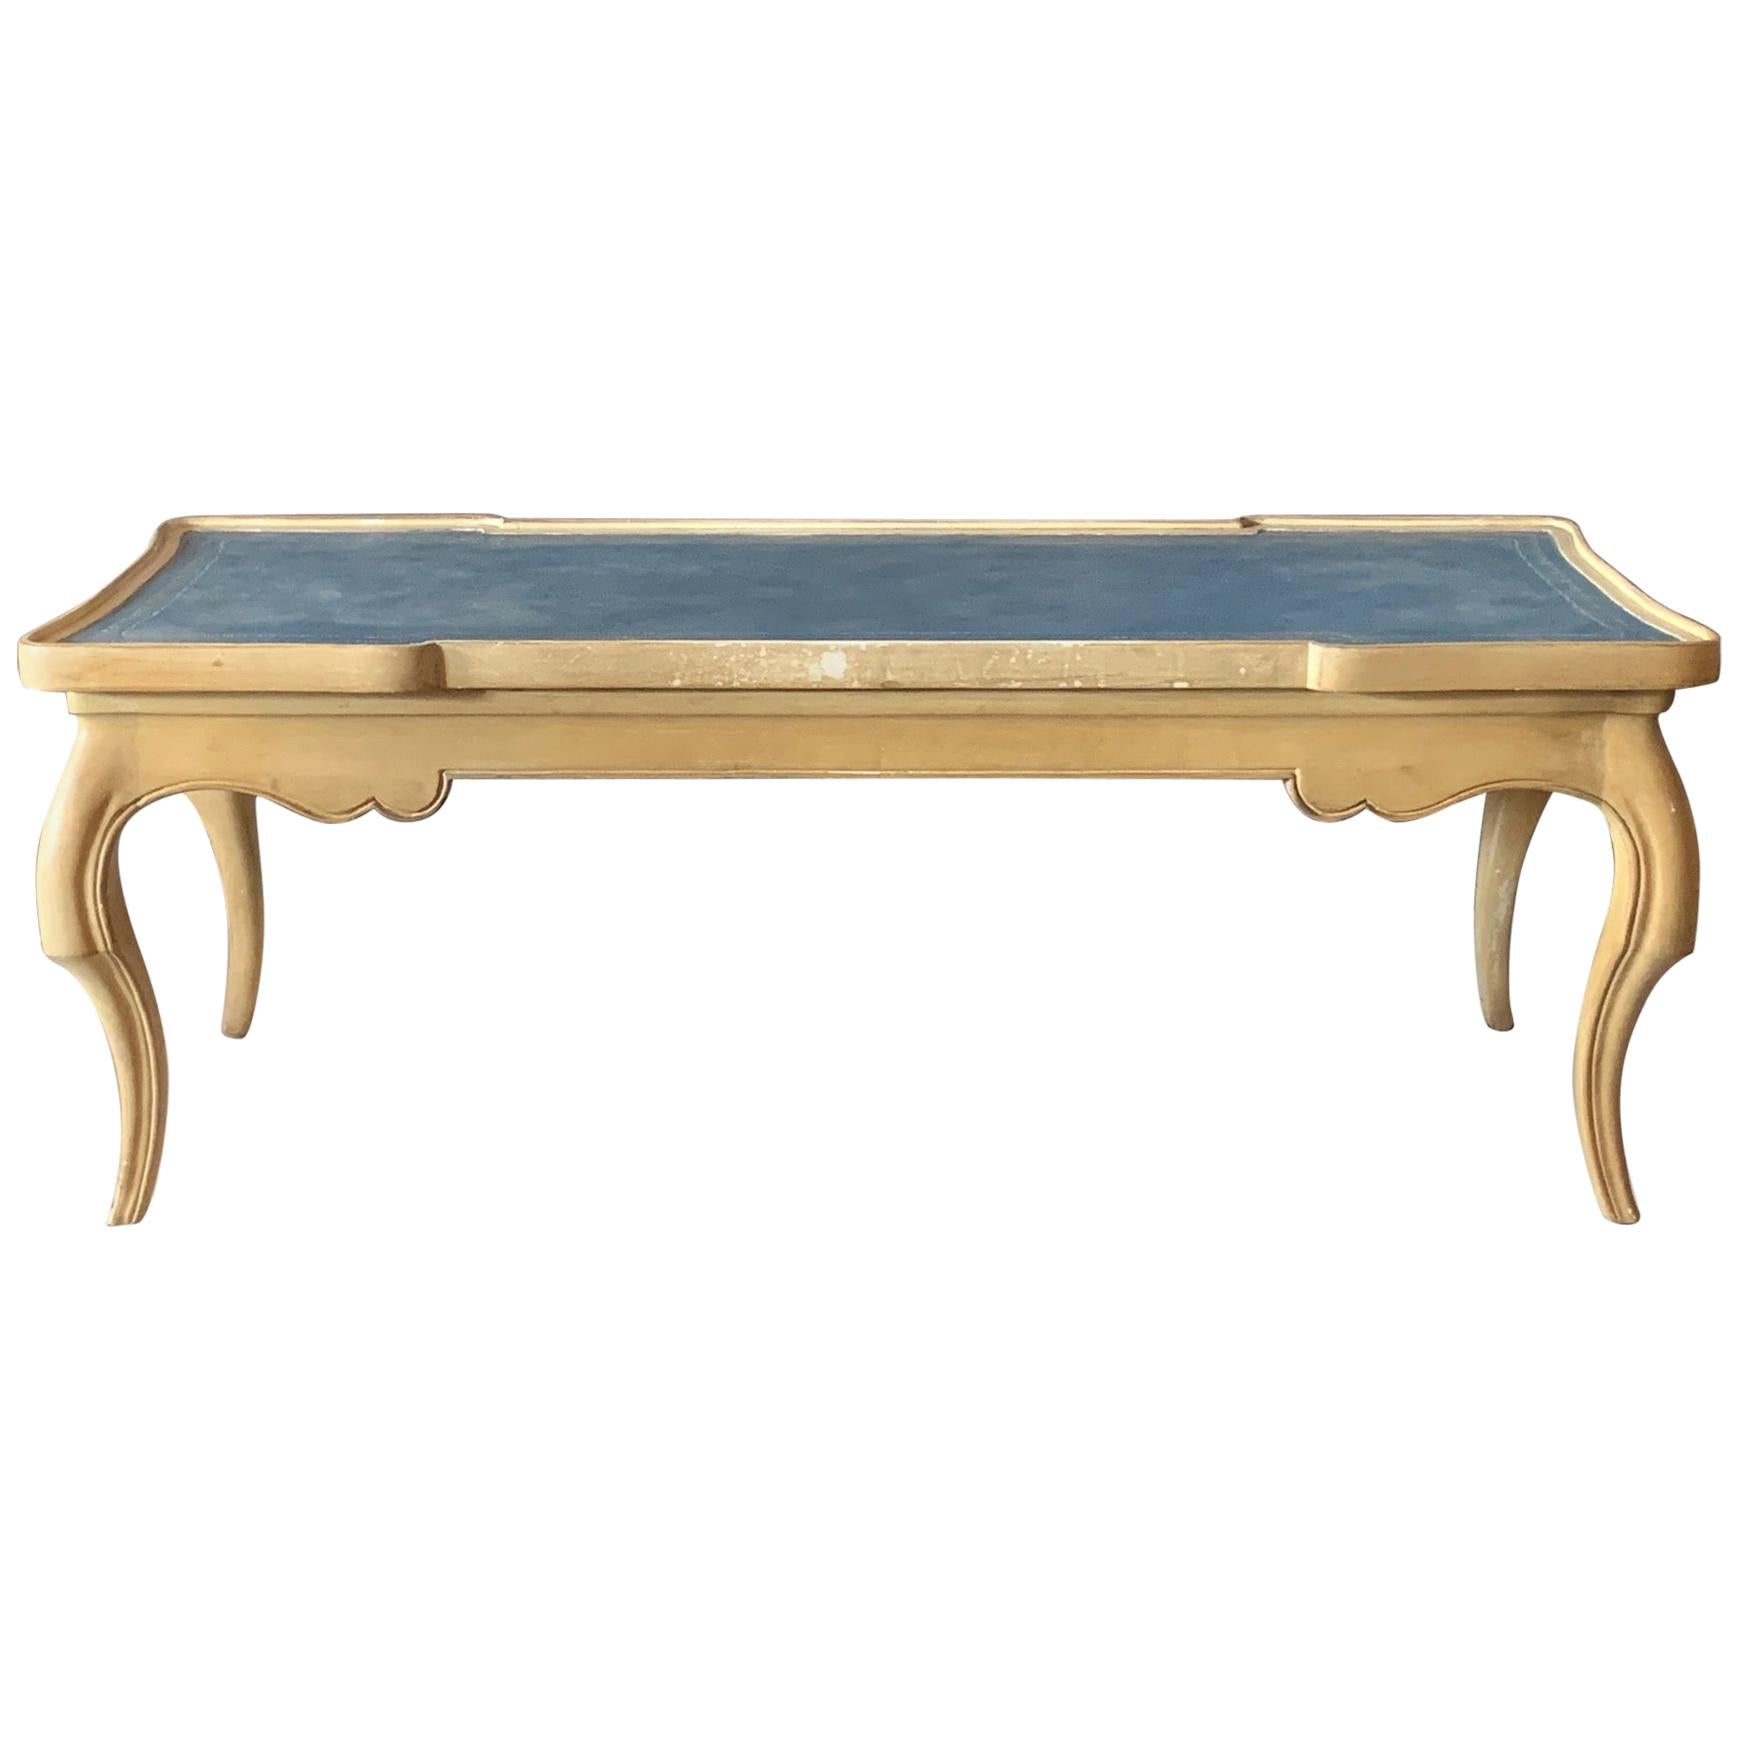 Charming French Provincial Coffee Table with Blue Leather Top